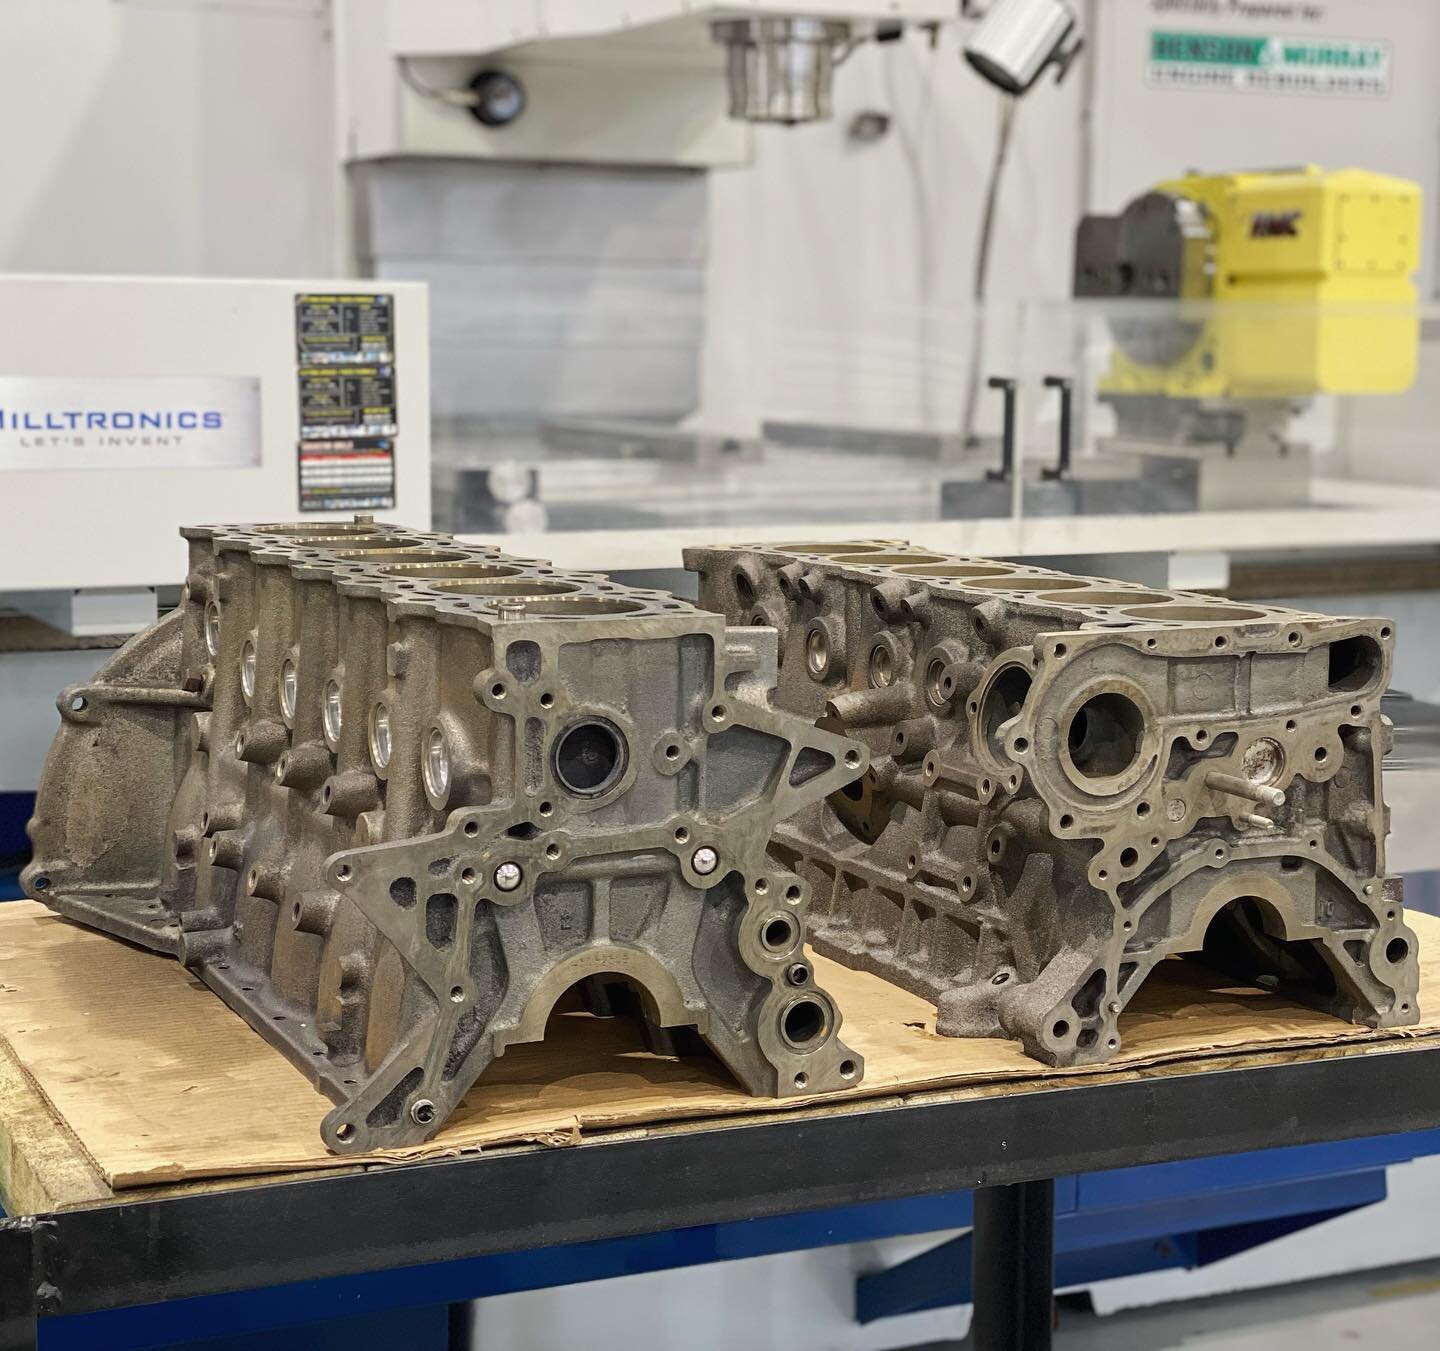 We have a couple of JDM icons in this week, although we&rsquo;re unsure if it&rsquo;s safe for them to be so close together? #nissan #rb25 #toyota #2jz #rb26 #nissanrb25 #toyota2jz #performance #enginebuild #engineer #machinist #precision #cnc #rebui